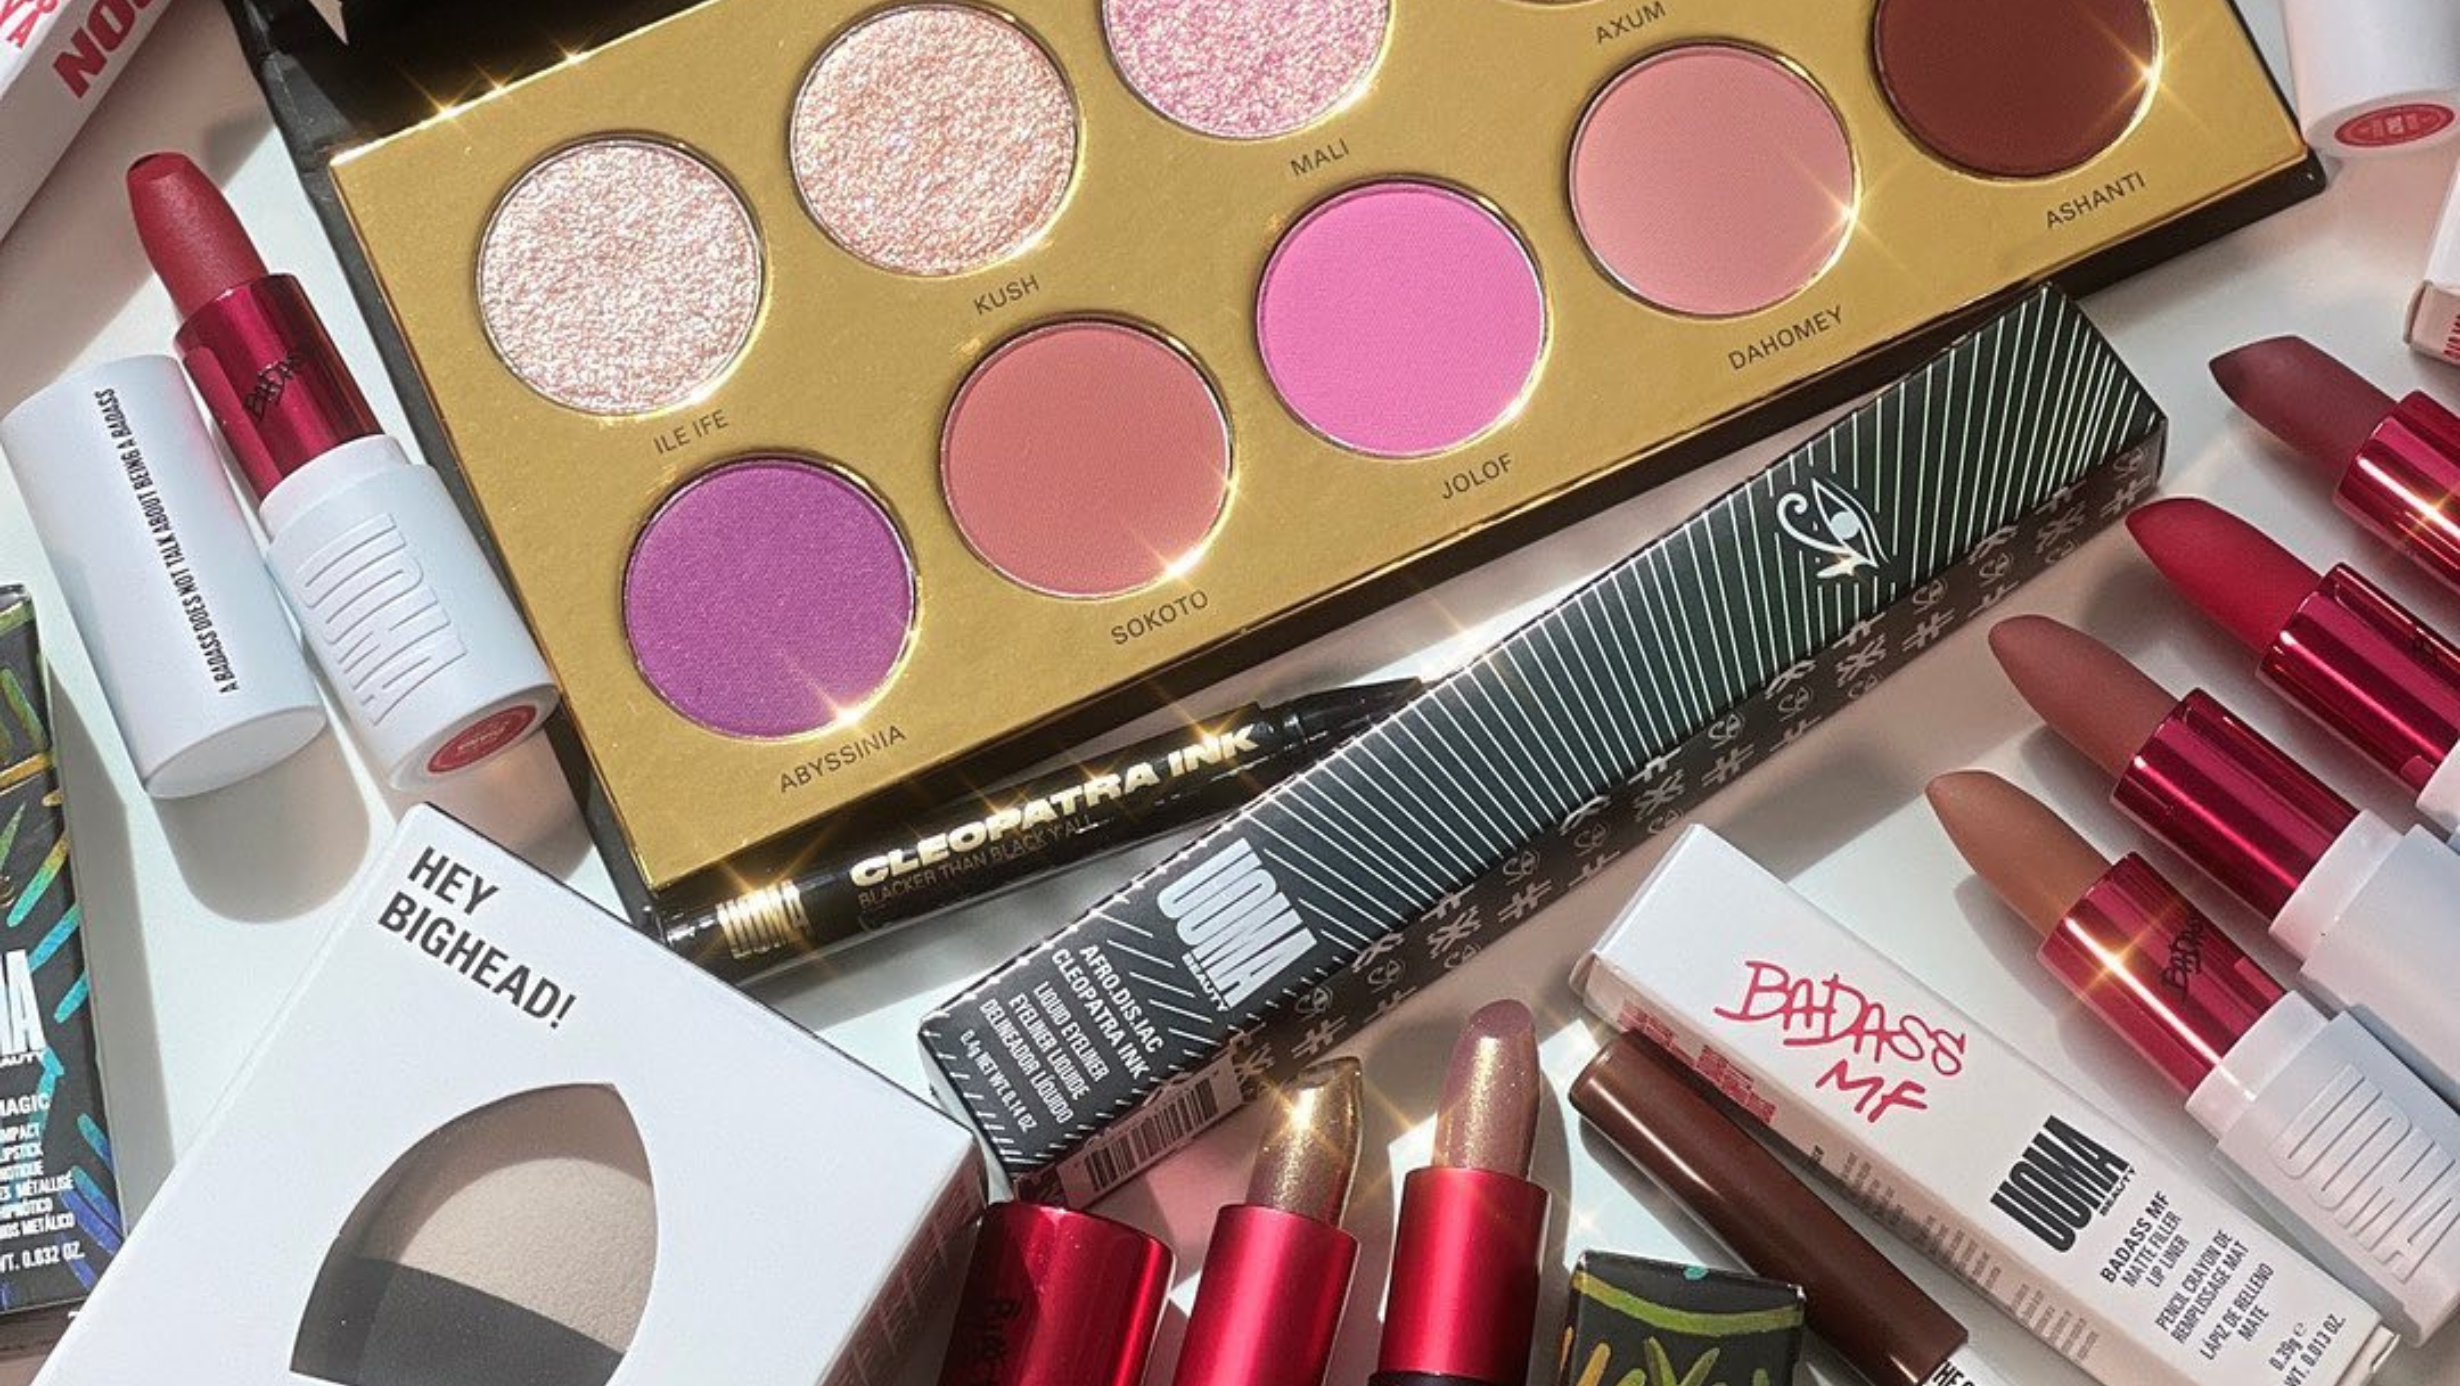 10 Beauty Finds To Grab On Sale For Labor Day